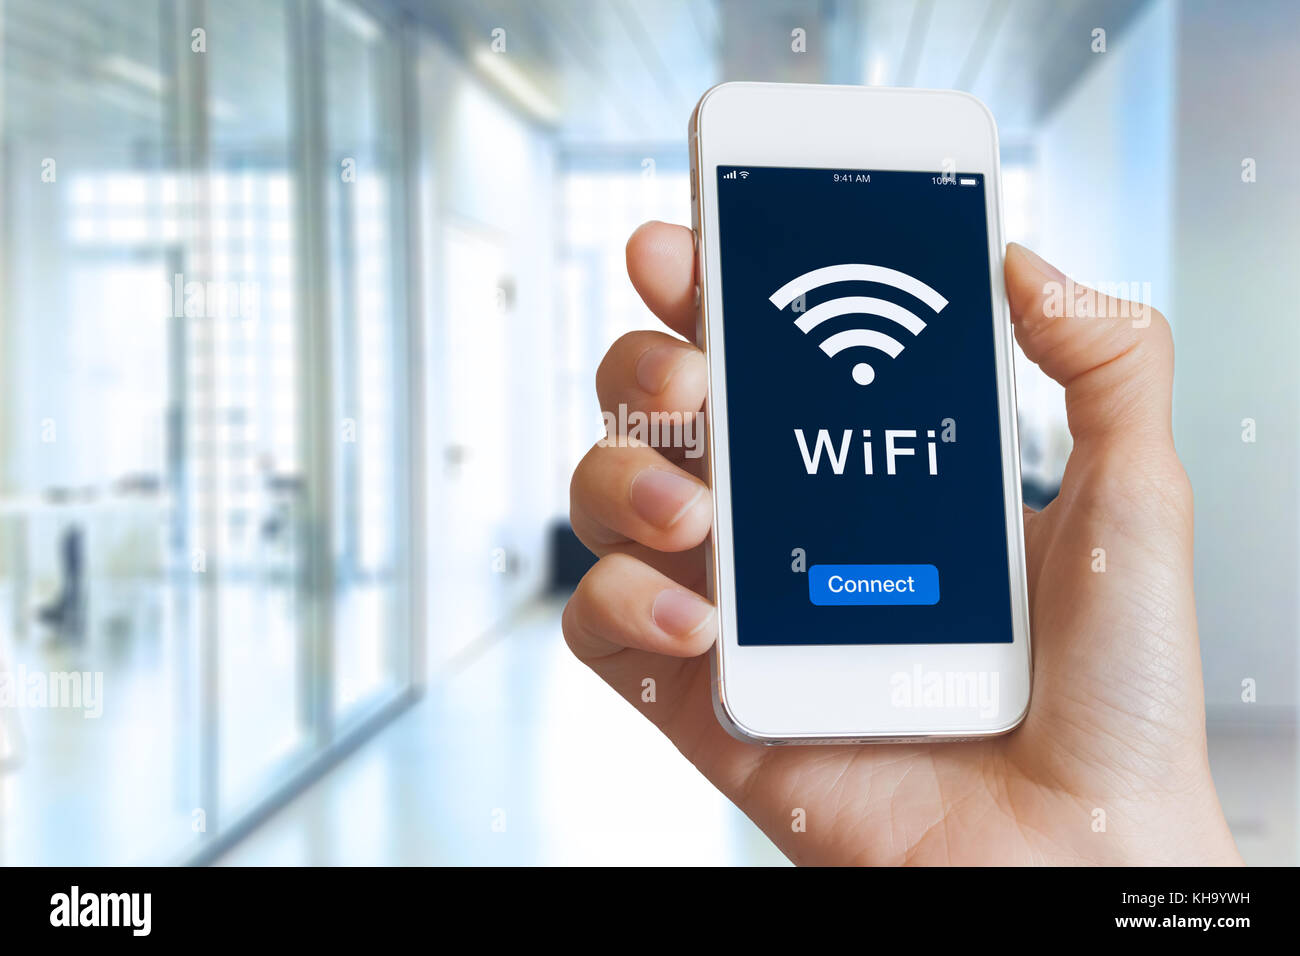 Close-up of hand holding smartphone with WiFi symbol and connect button on the screen to access public wireless internet, blurred building interior Stock Photo